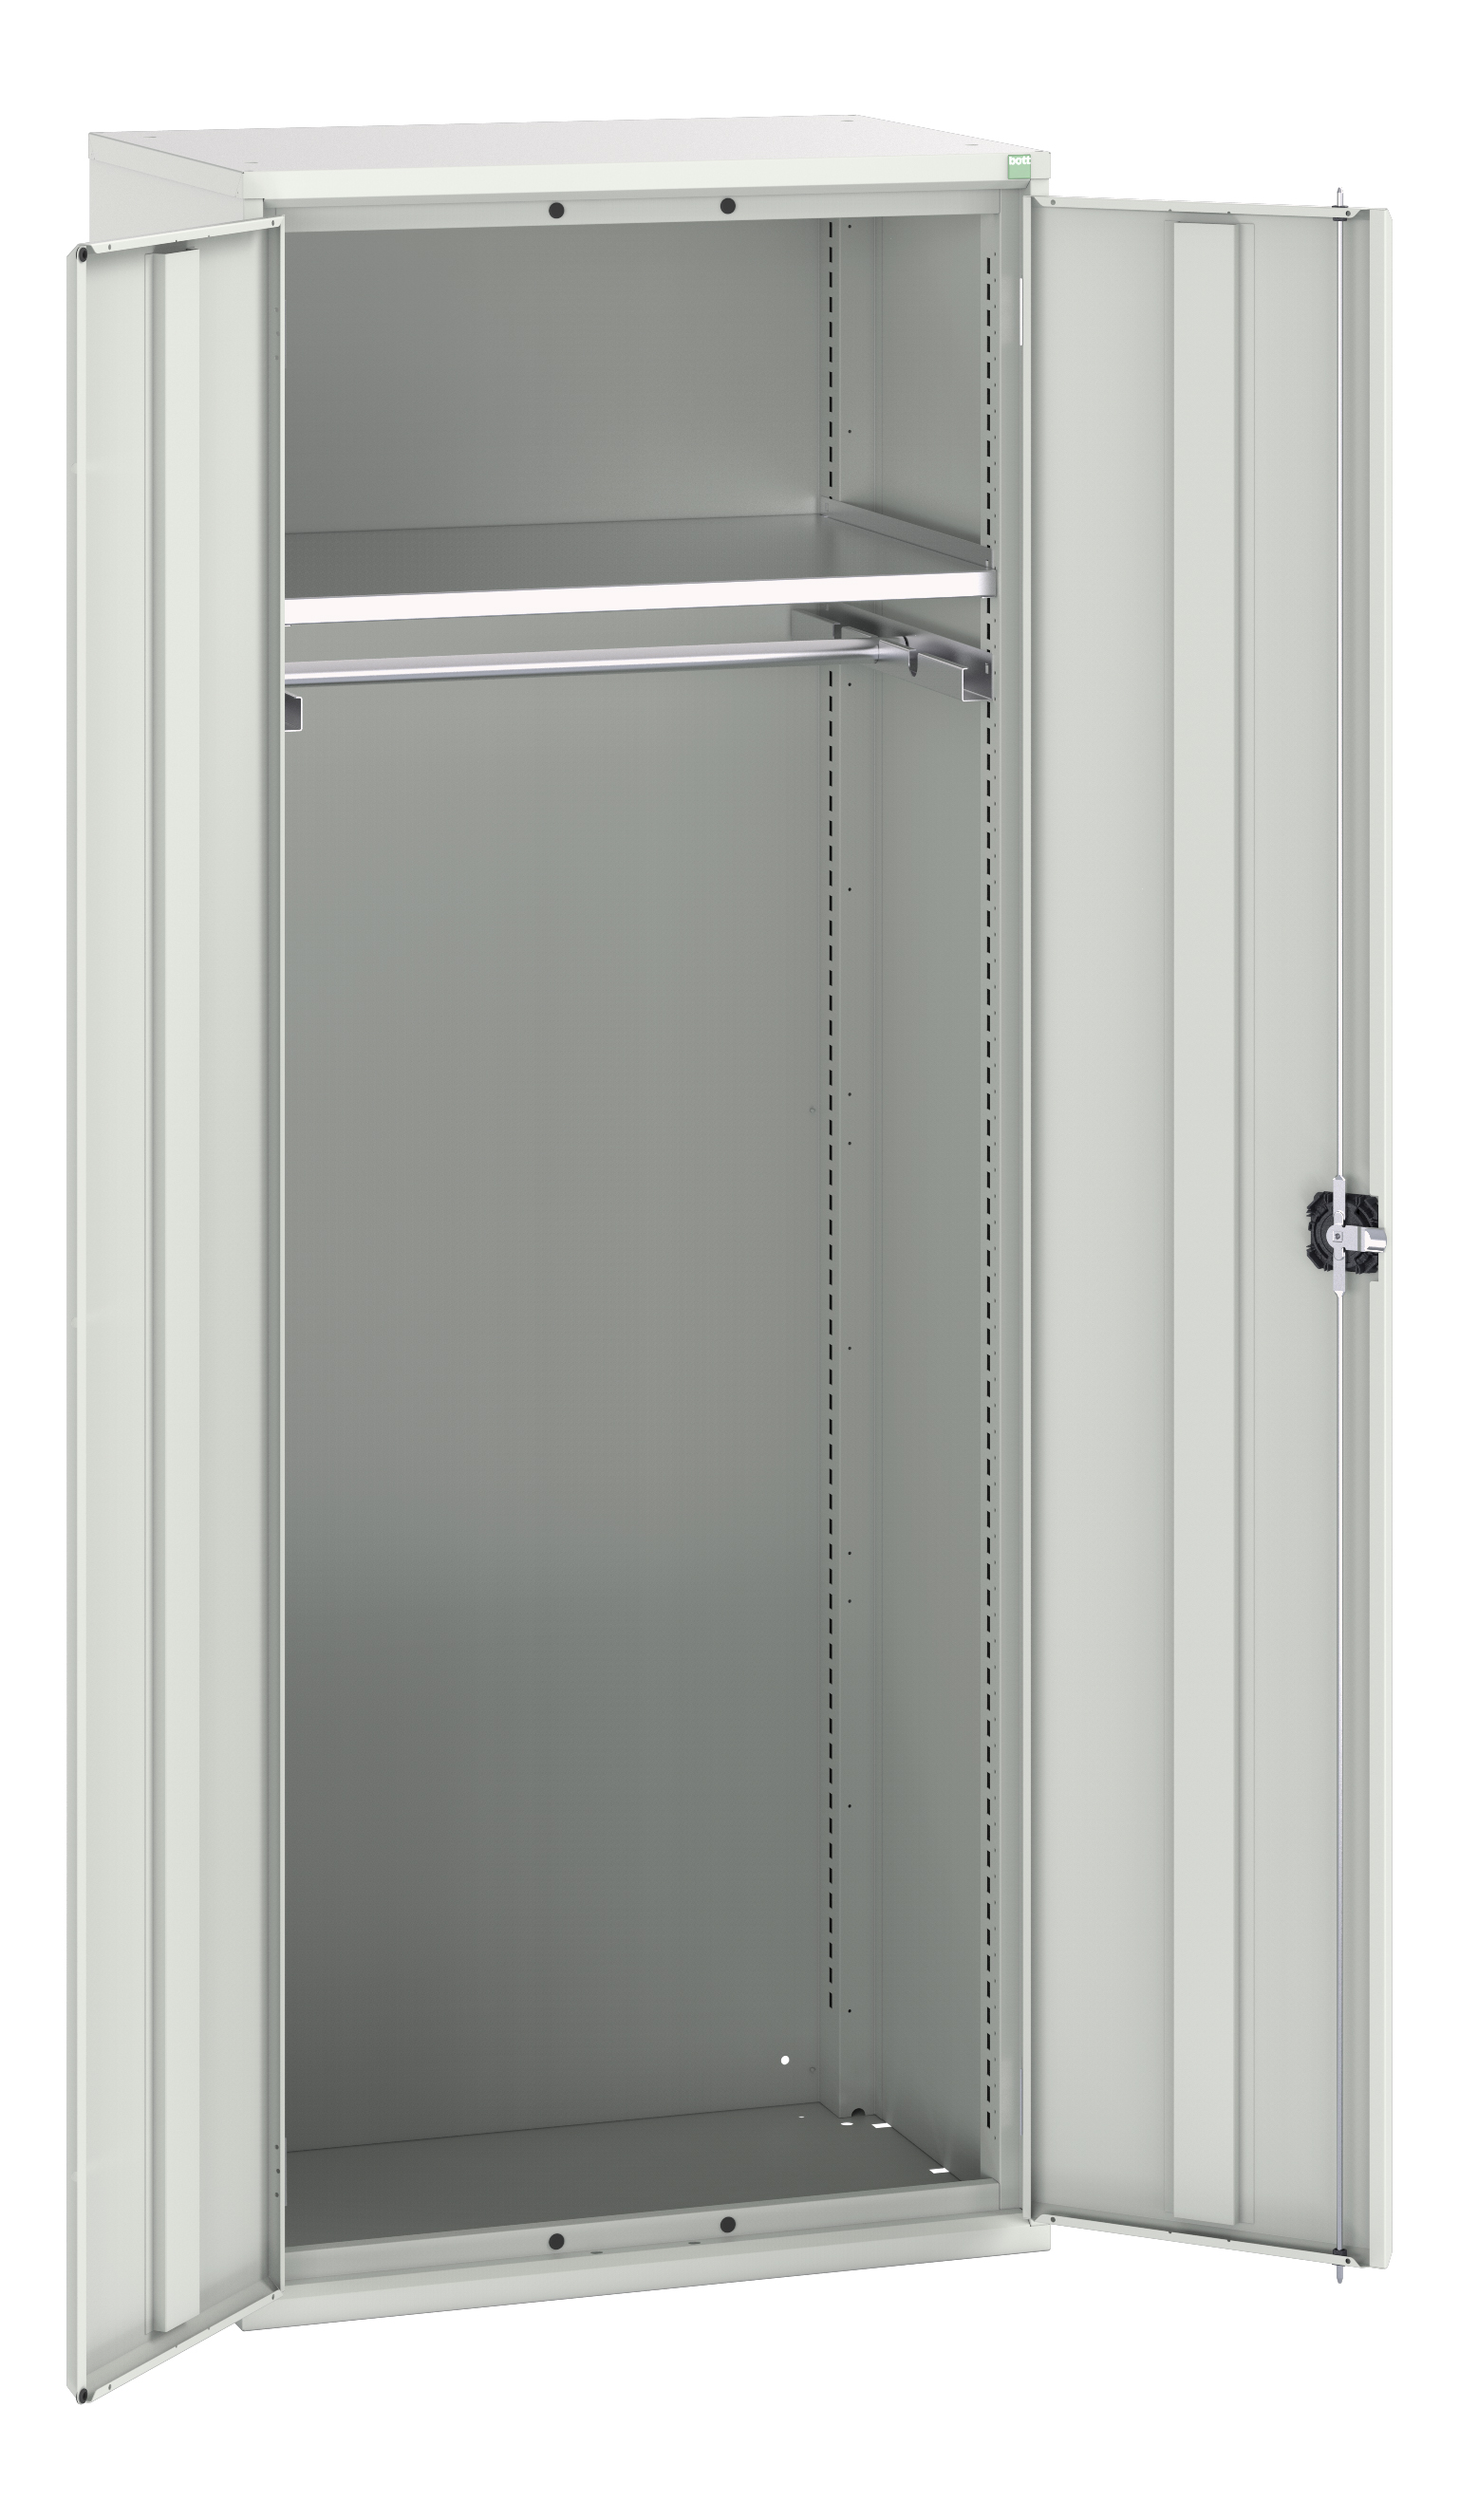 Bott Verso Ppe / Janitorial Kitted Cupboard - 16926459.16